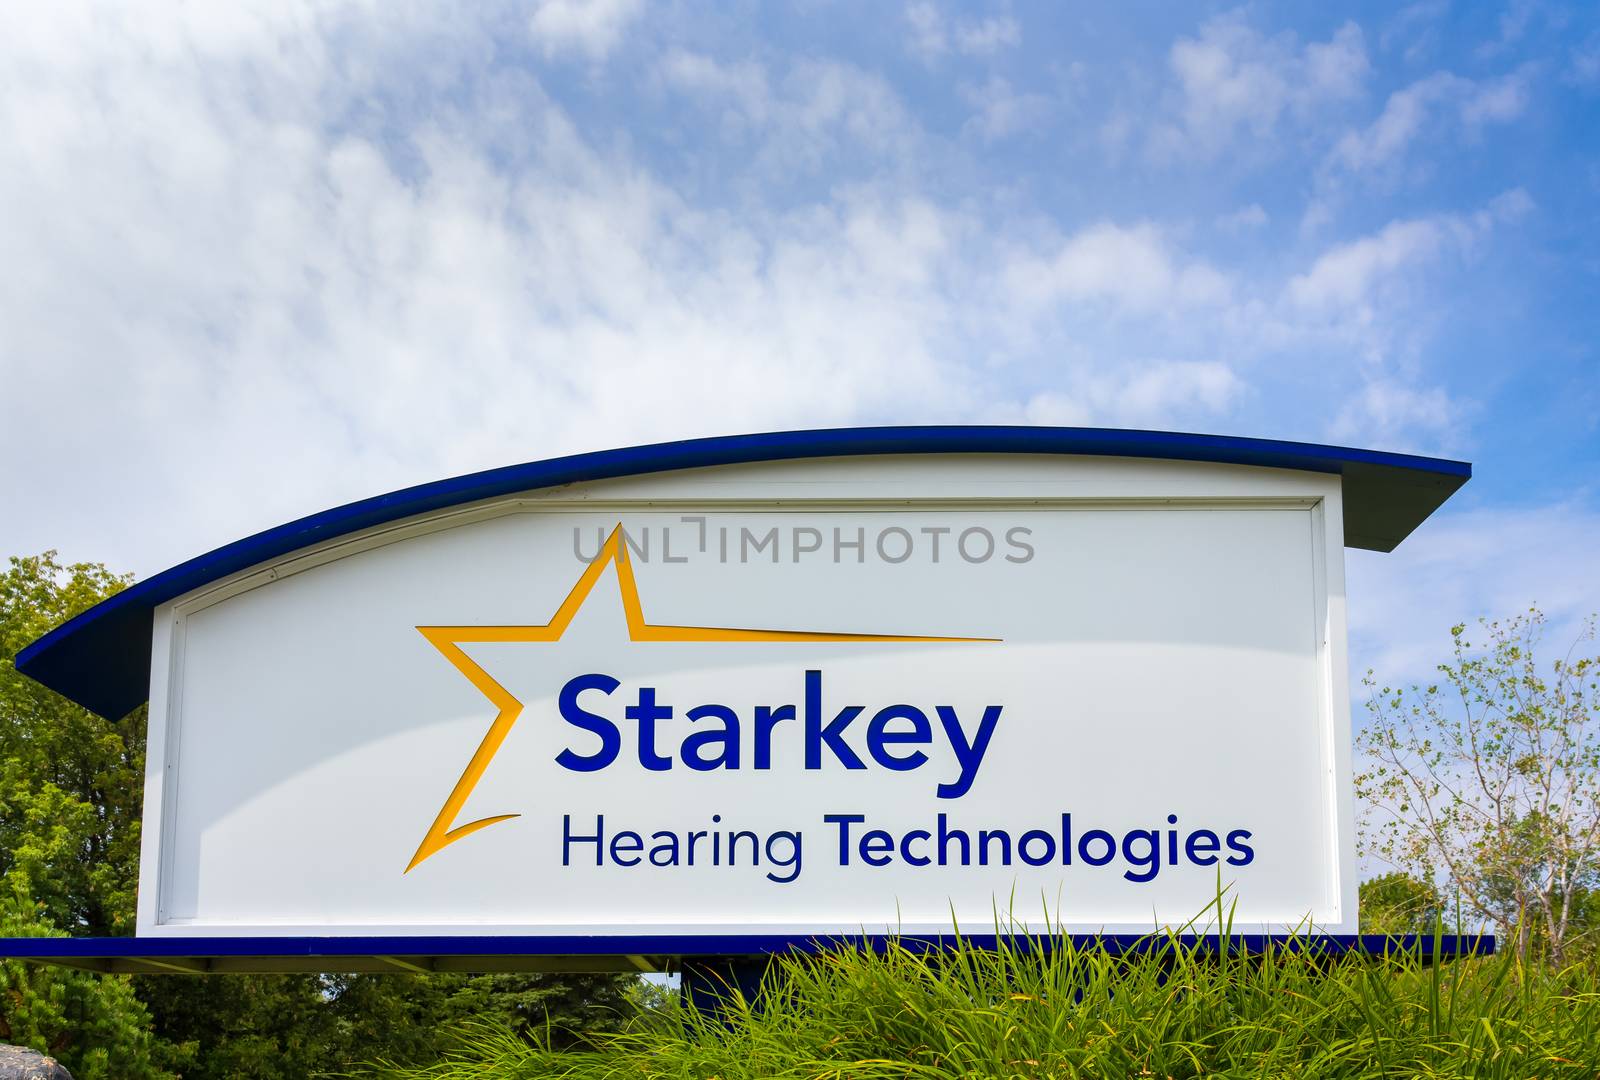 Starkey Hearing Technologies Headquarters and Sign by wolterk